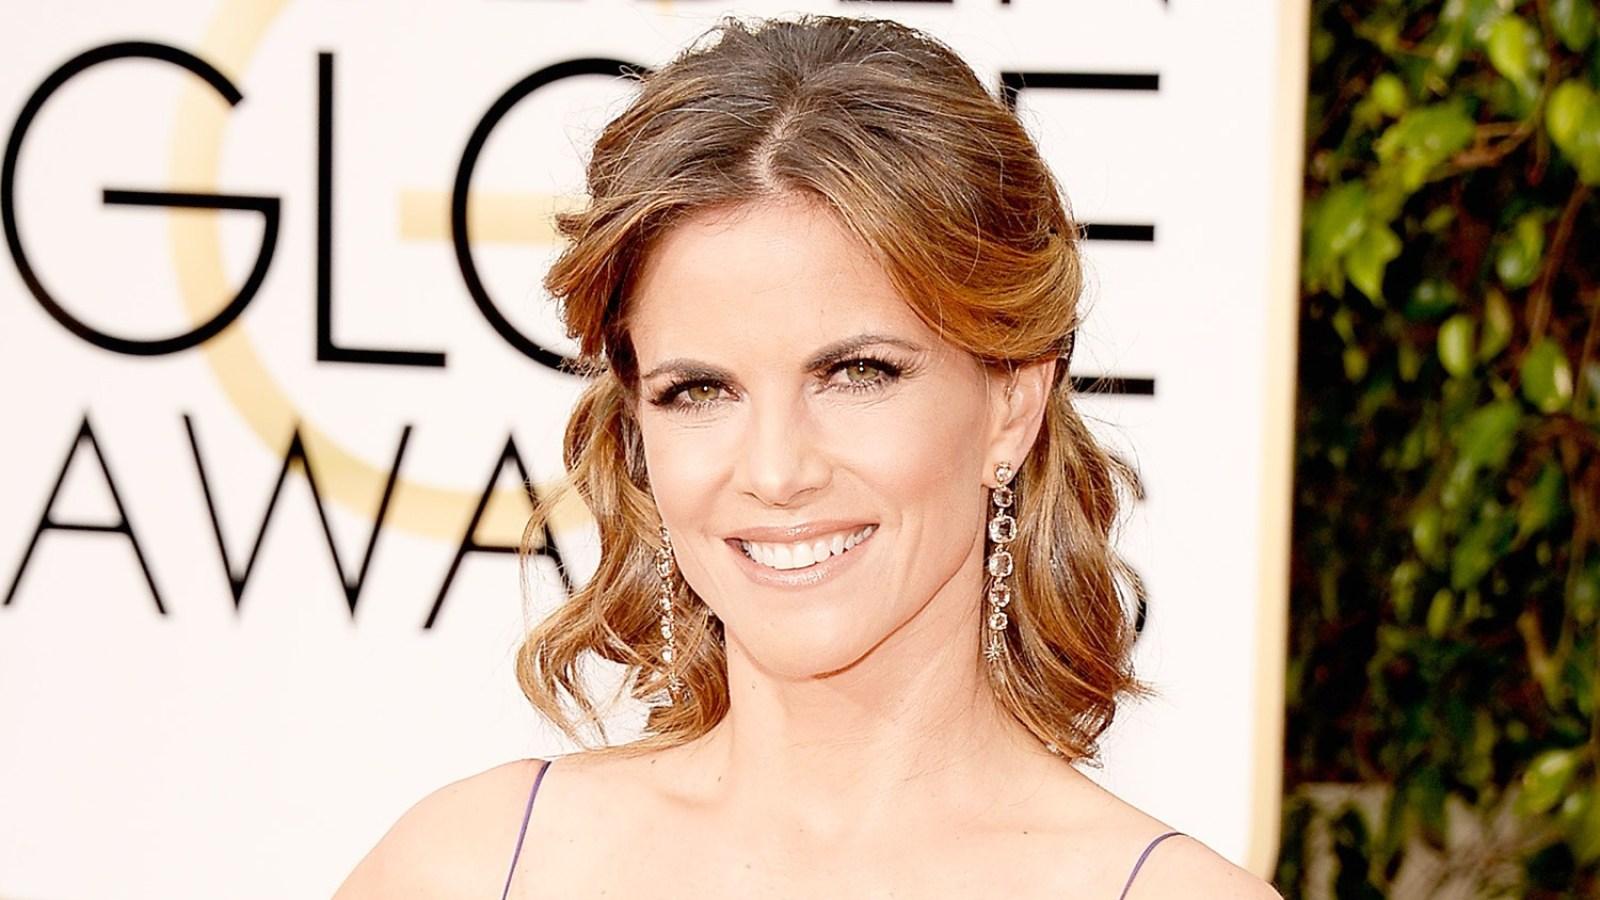 Today's Natalie Morales to Cohost 'Access Hollywood': Details